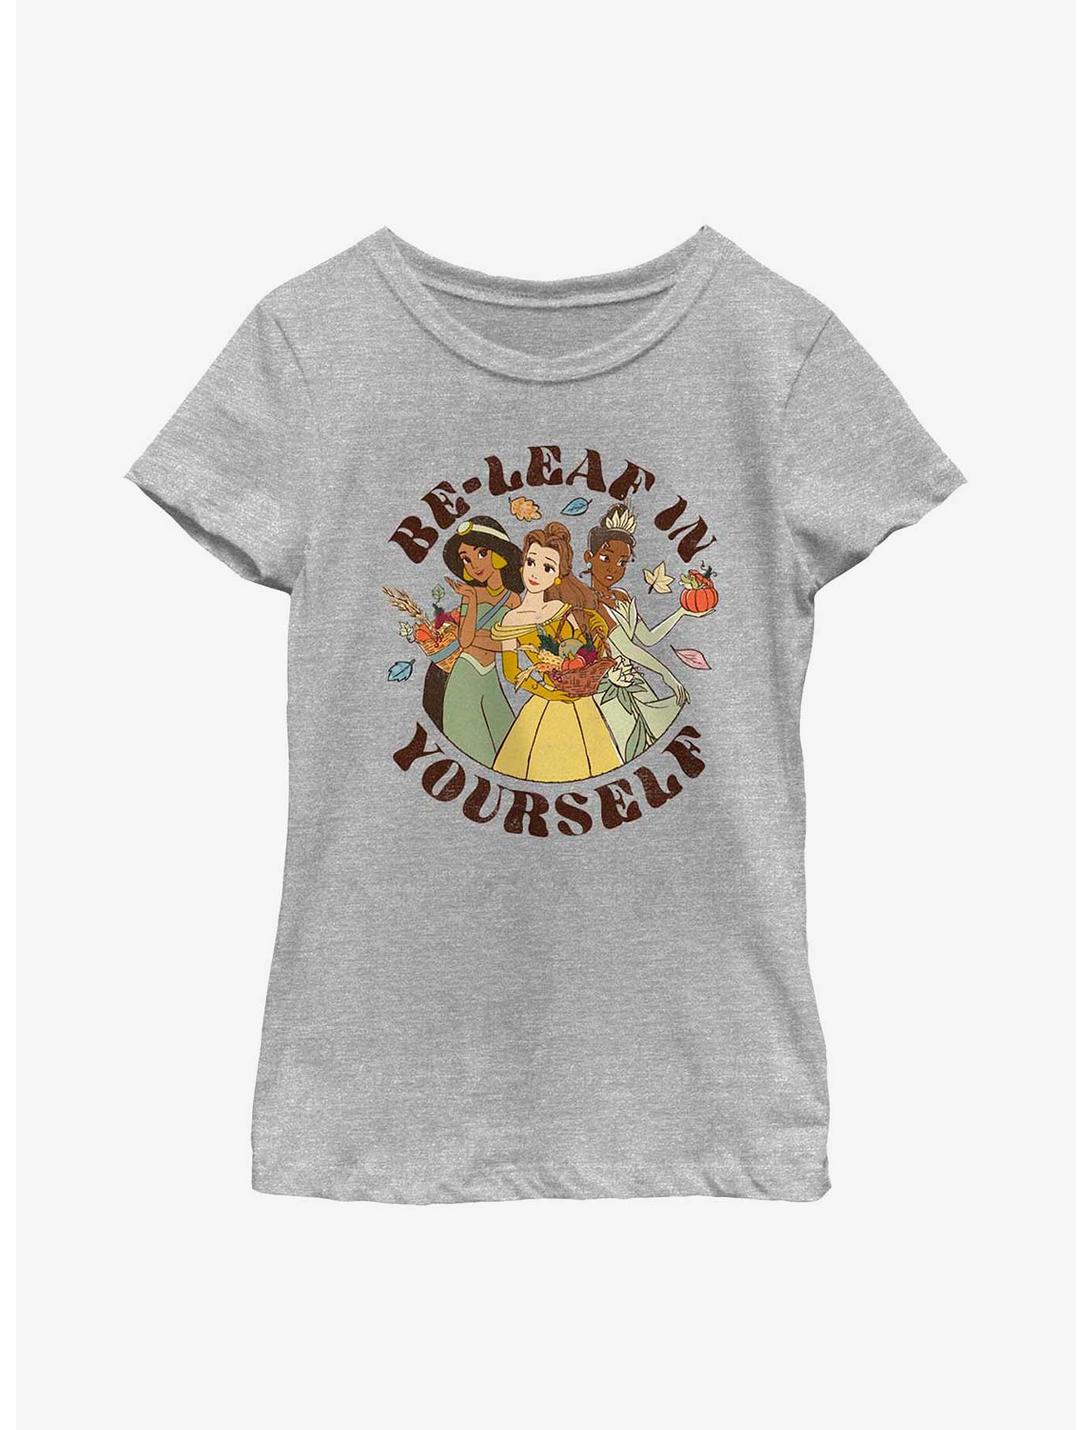 Disney Princesses Fall For Yourself Youth Girls T-Shirt, ATH HTR, hi-res